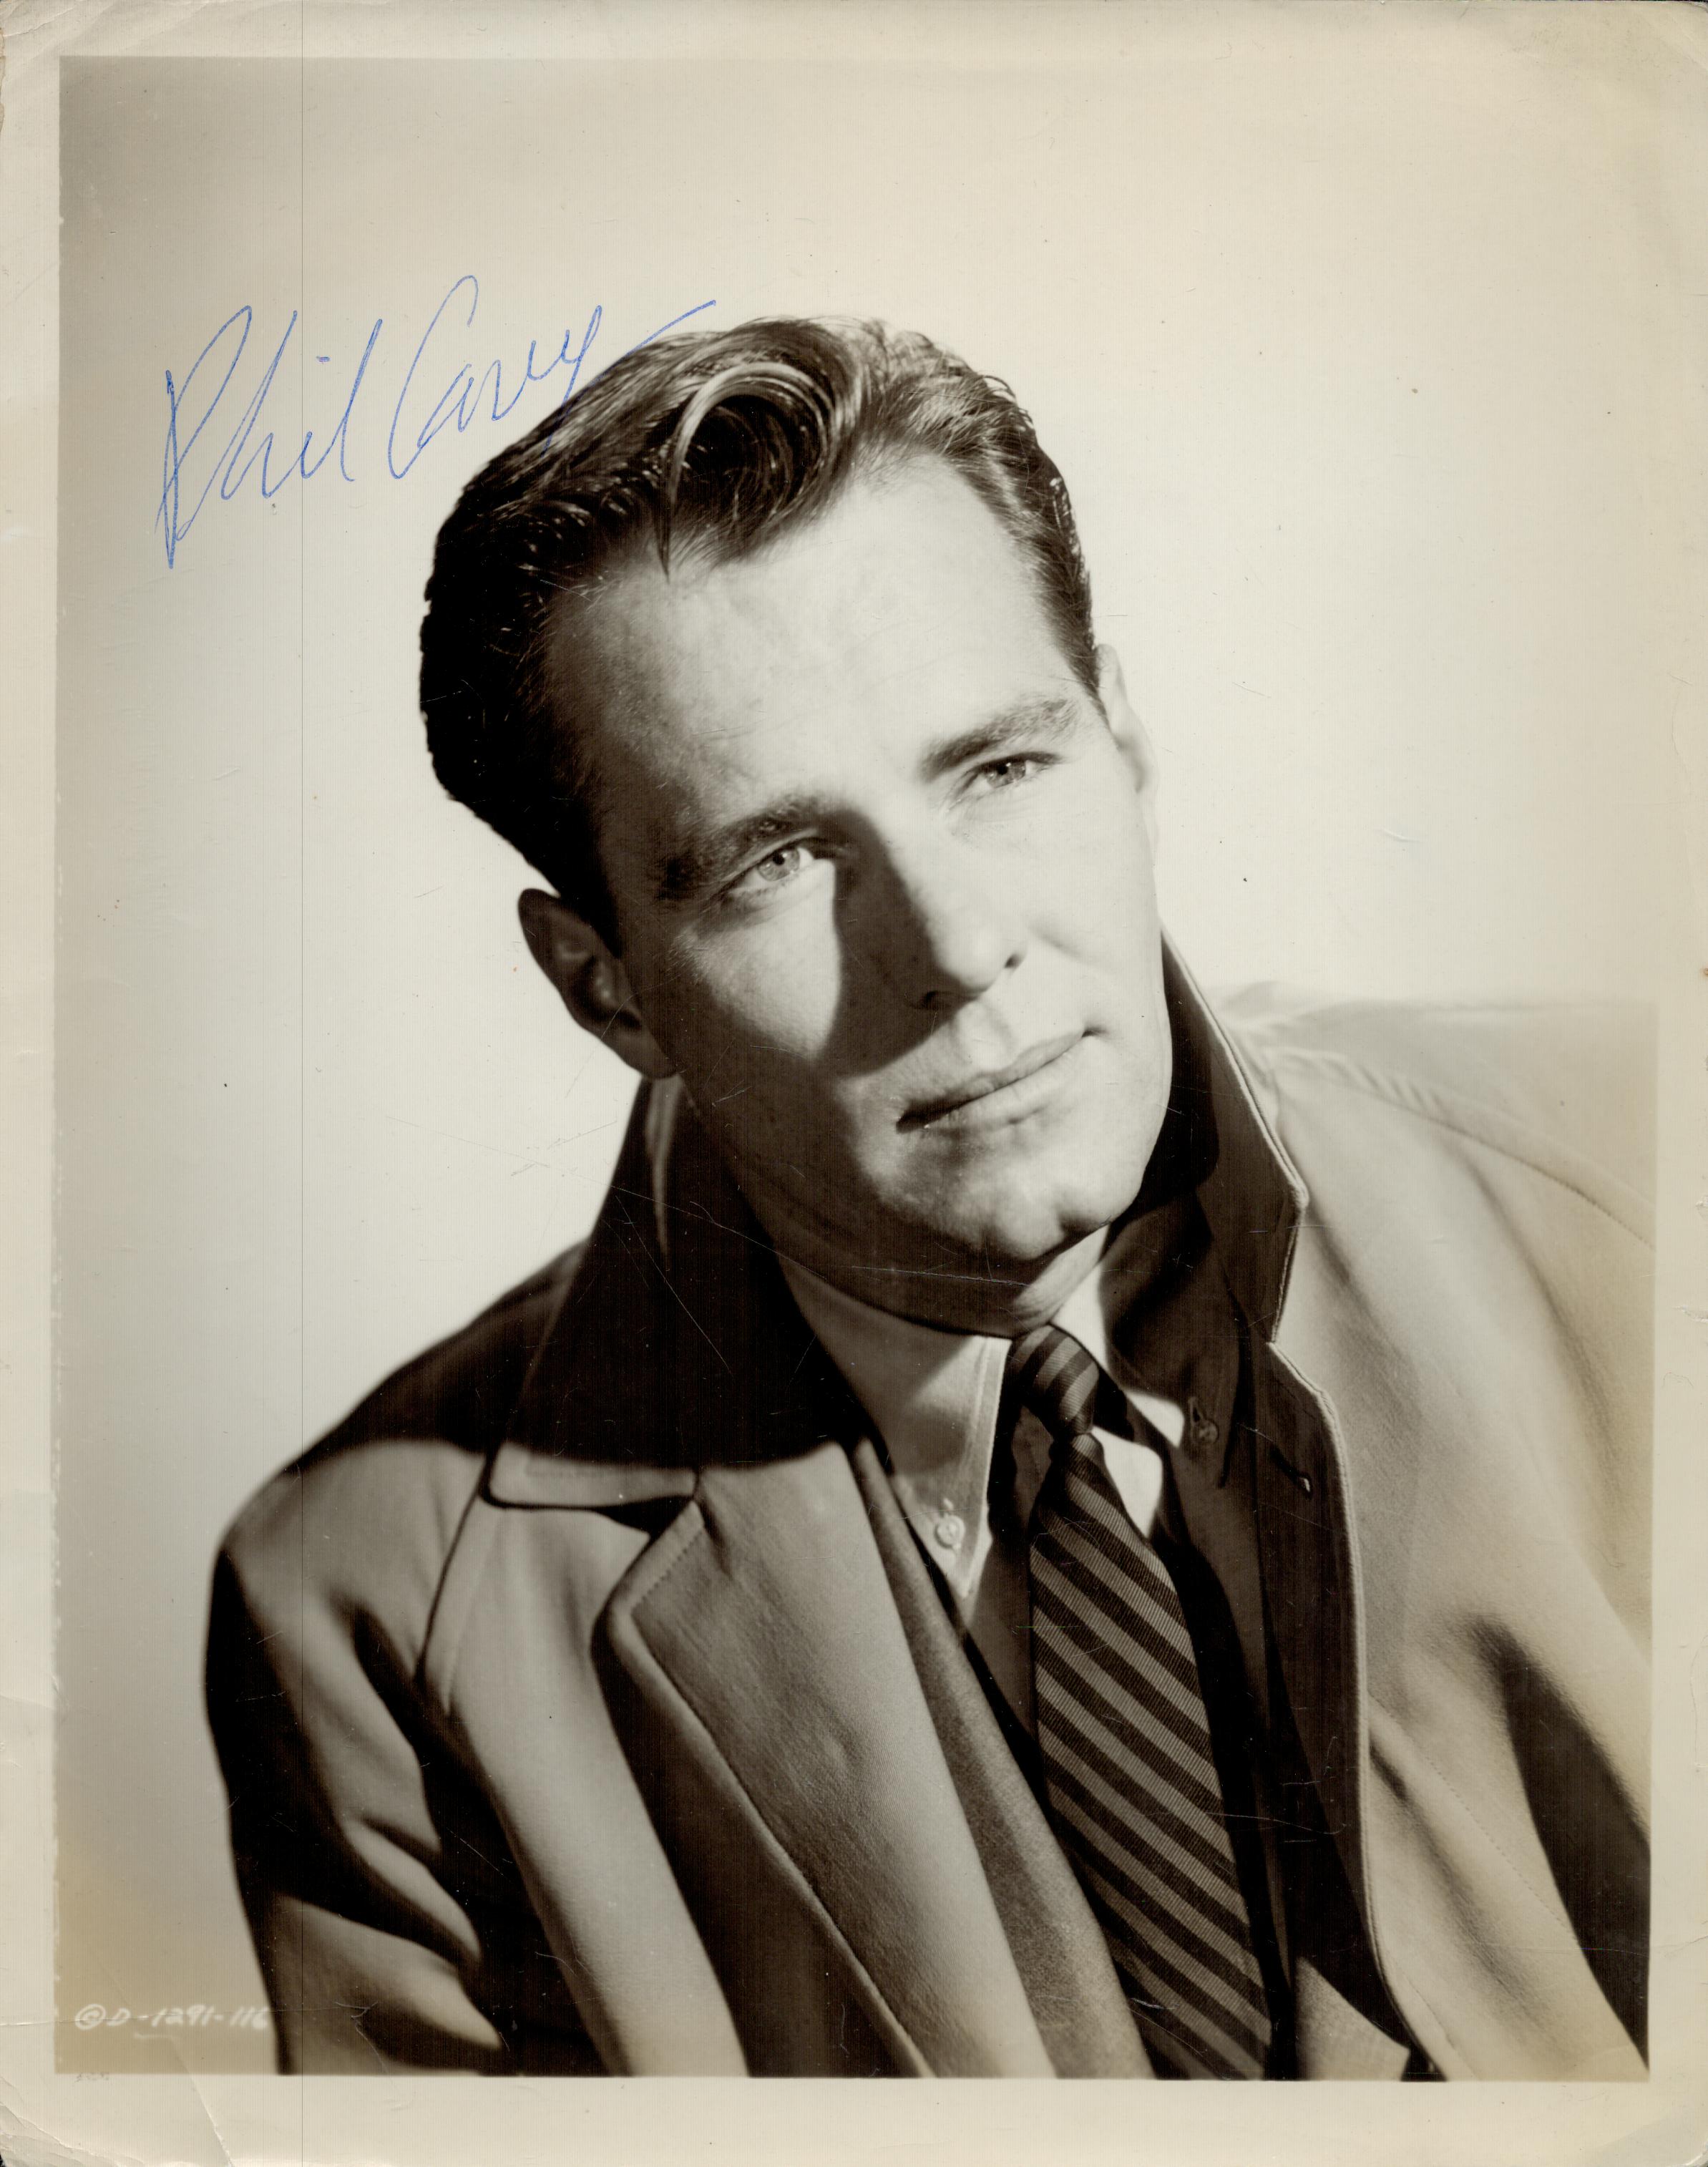 Tv and Film. Philip Carey Signed 10 x 8 inch Vintage Black and White Press Photo. Signed in blue